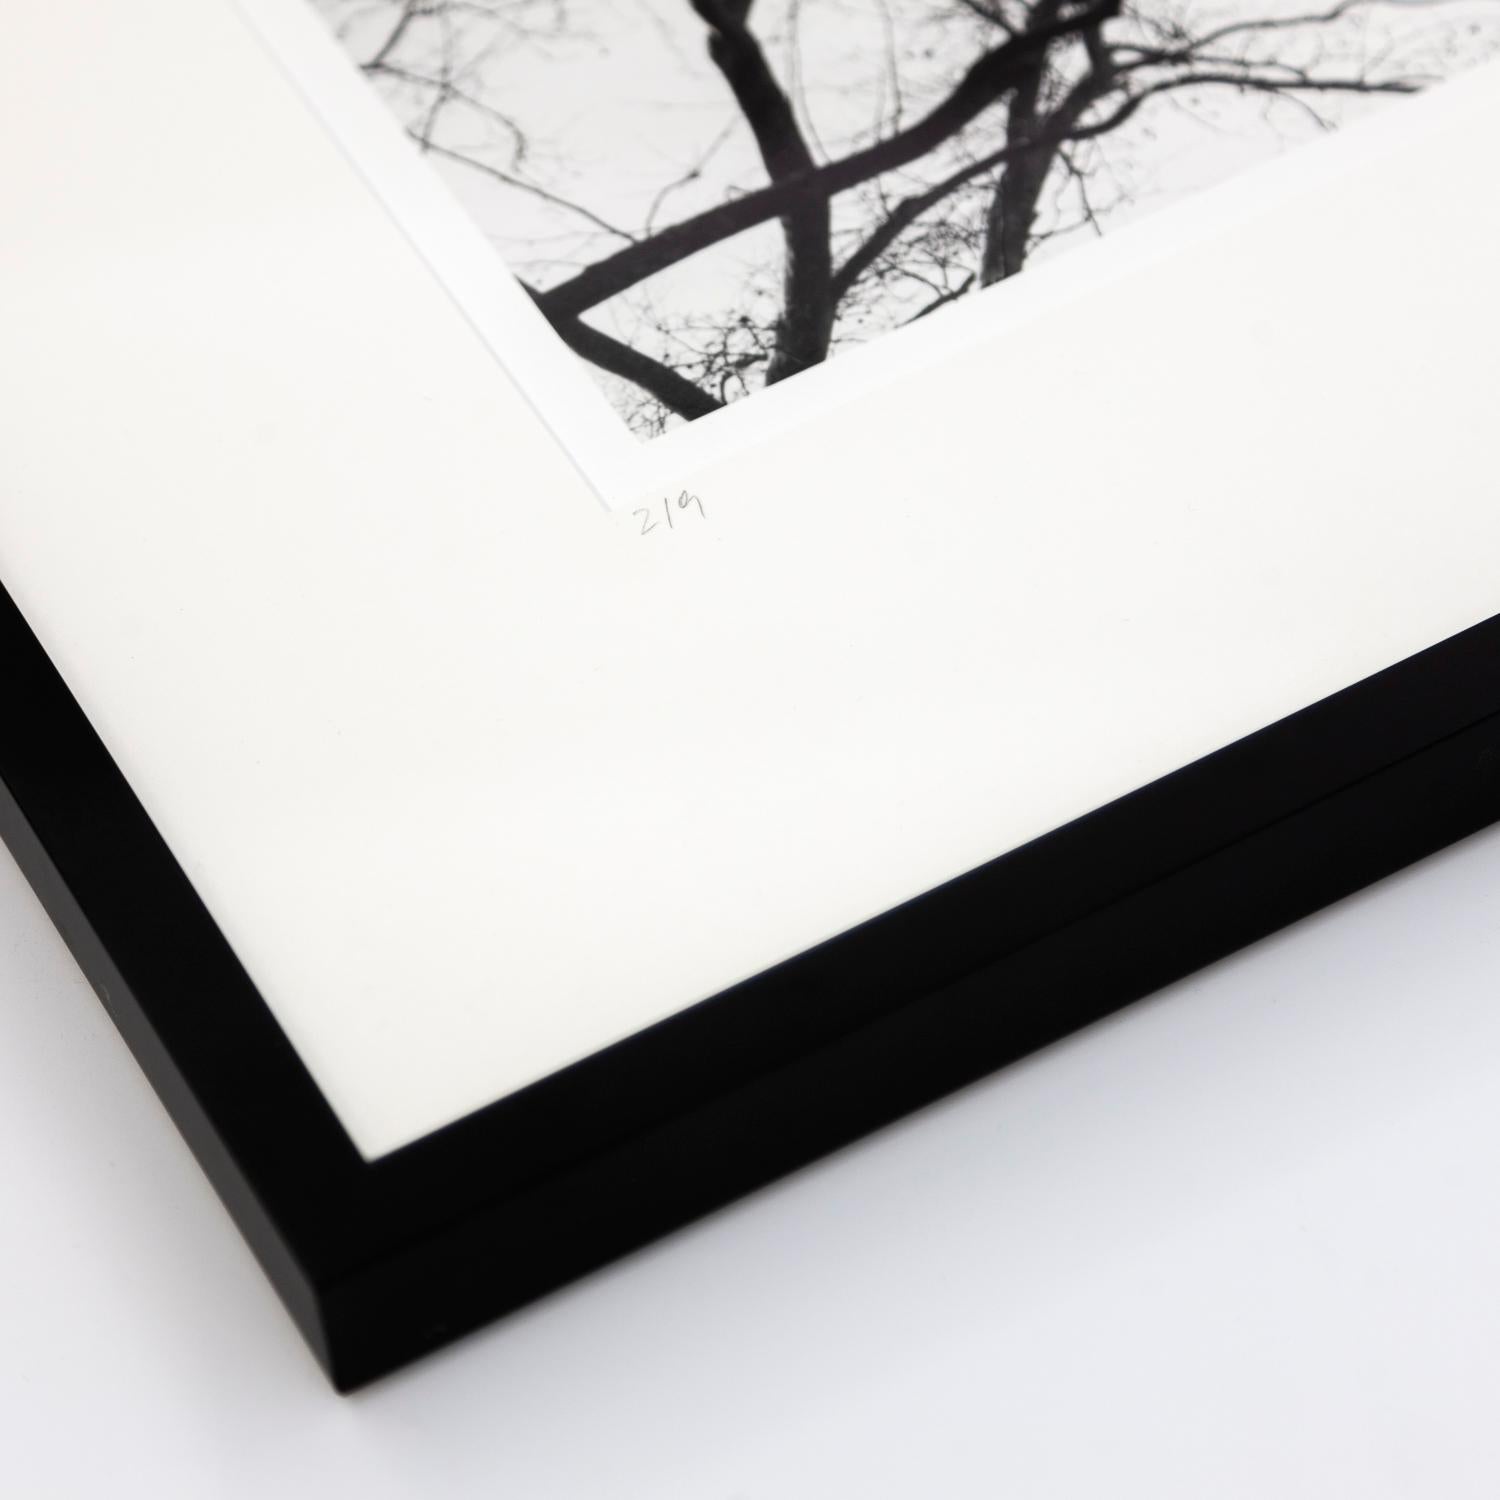 Gerald Berghammer - Limited Edition 2/9
Silver Gelatin Prints, Selenium Toned, Printed 2017
Signed, numbered, dated by Artis.
Handmade wood frame, black, natural white archival Passepartout, anti-reflection white glass, UV 70, metal corners for wall